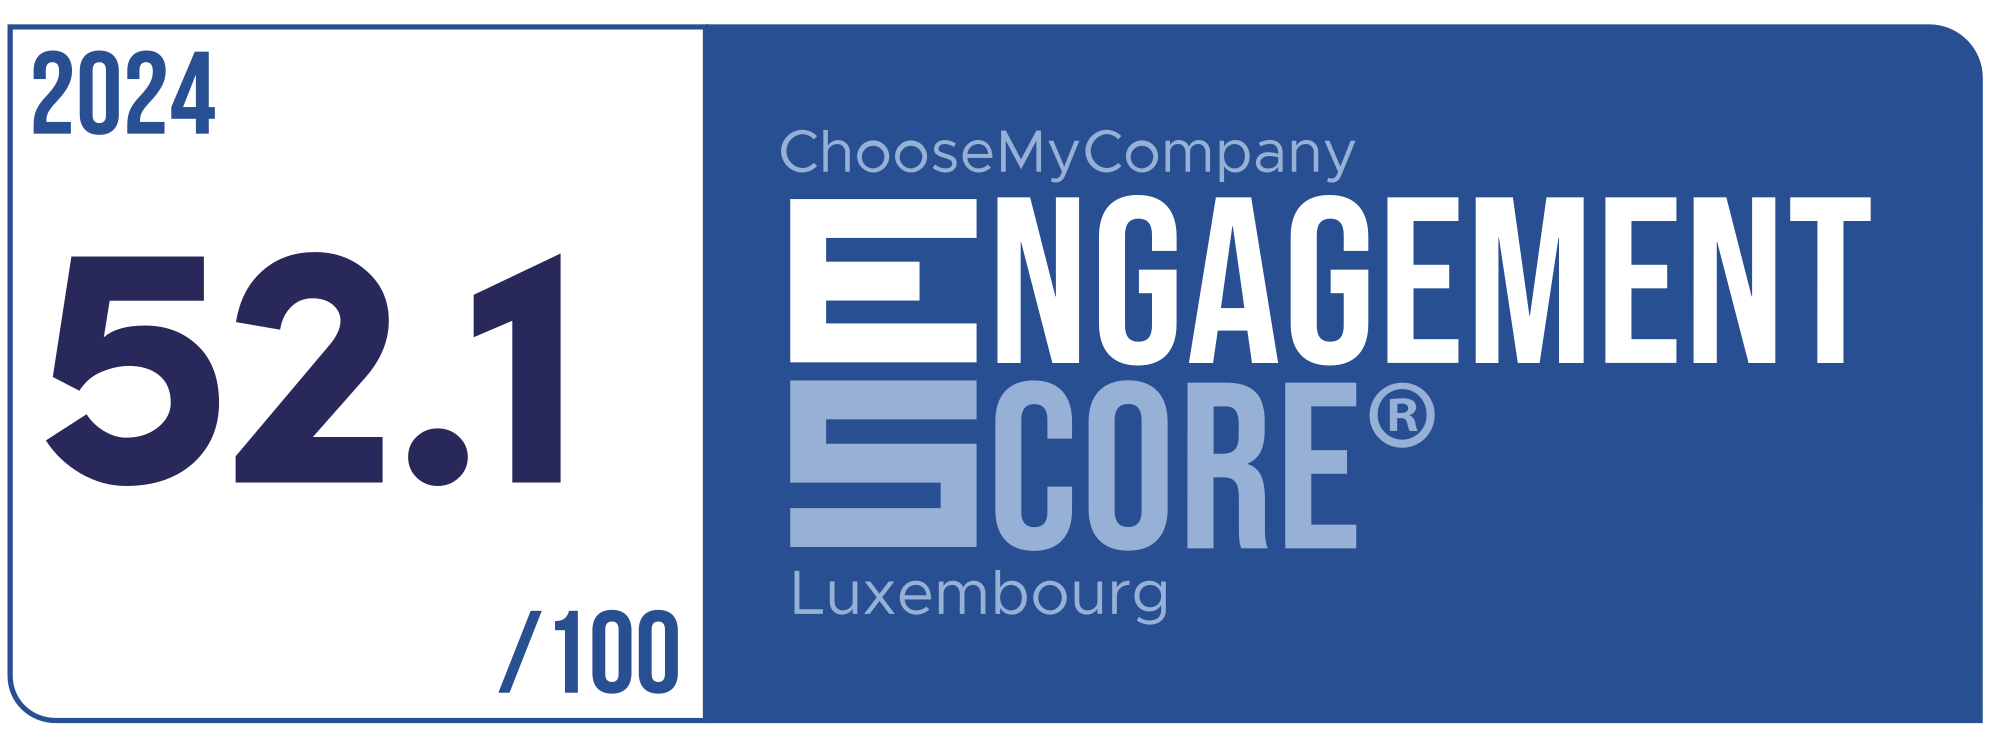 Label Engagement Score 2024 Luxembourg